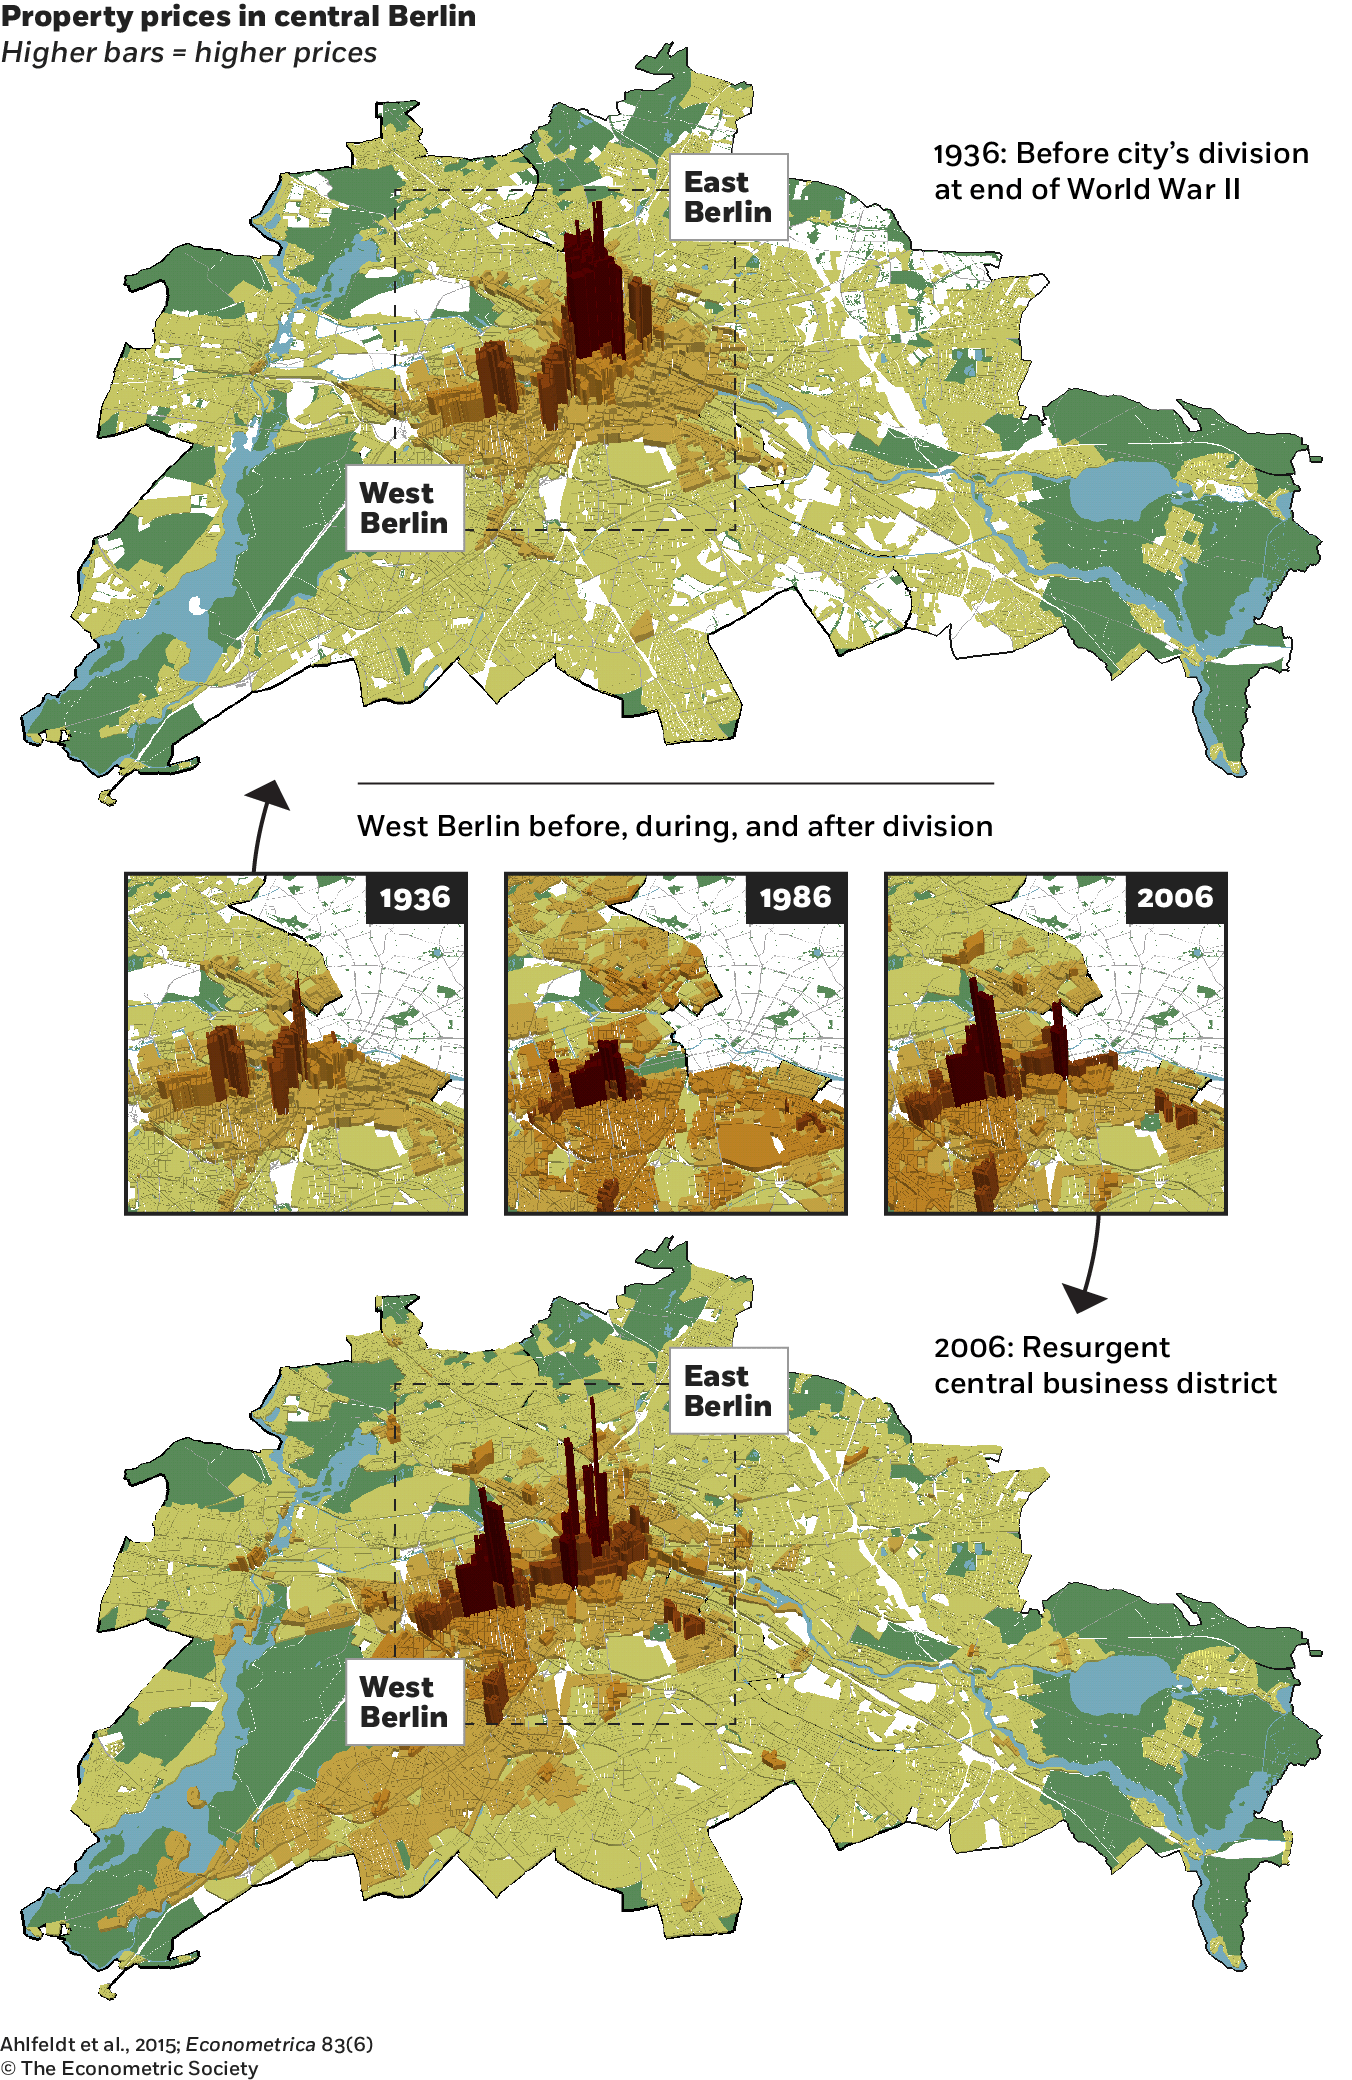 A series of three-dimensional maps of central Berlin using the height of extruded shapes to indicate property prices during three different years. In 1936, before the city’s division, the shape heights in East Berlin are more than twice as tall as those in West Berlin. In 1986, while the city is divided, only West Berlin is shown, with new areas growing in value. And in 2006 after reunification, both areas are shown again, with East Berlin having a few of the highest-value areas but West Berlin having a stronger cluster overall.